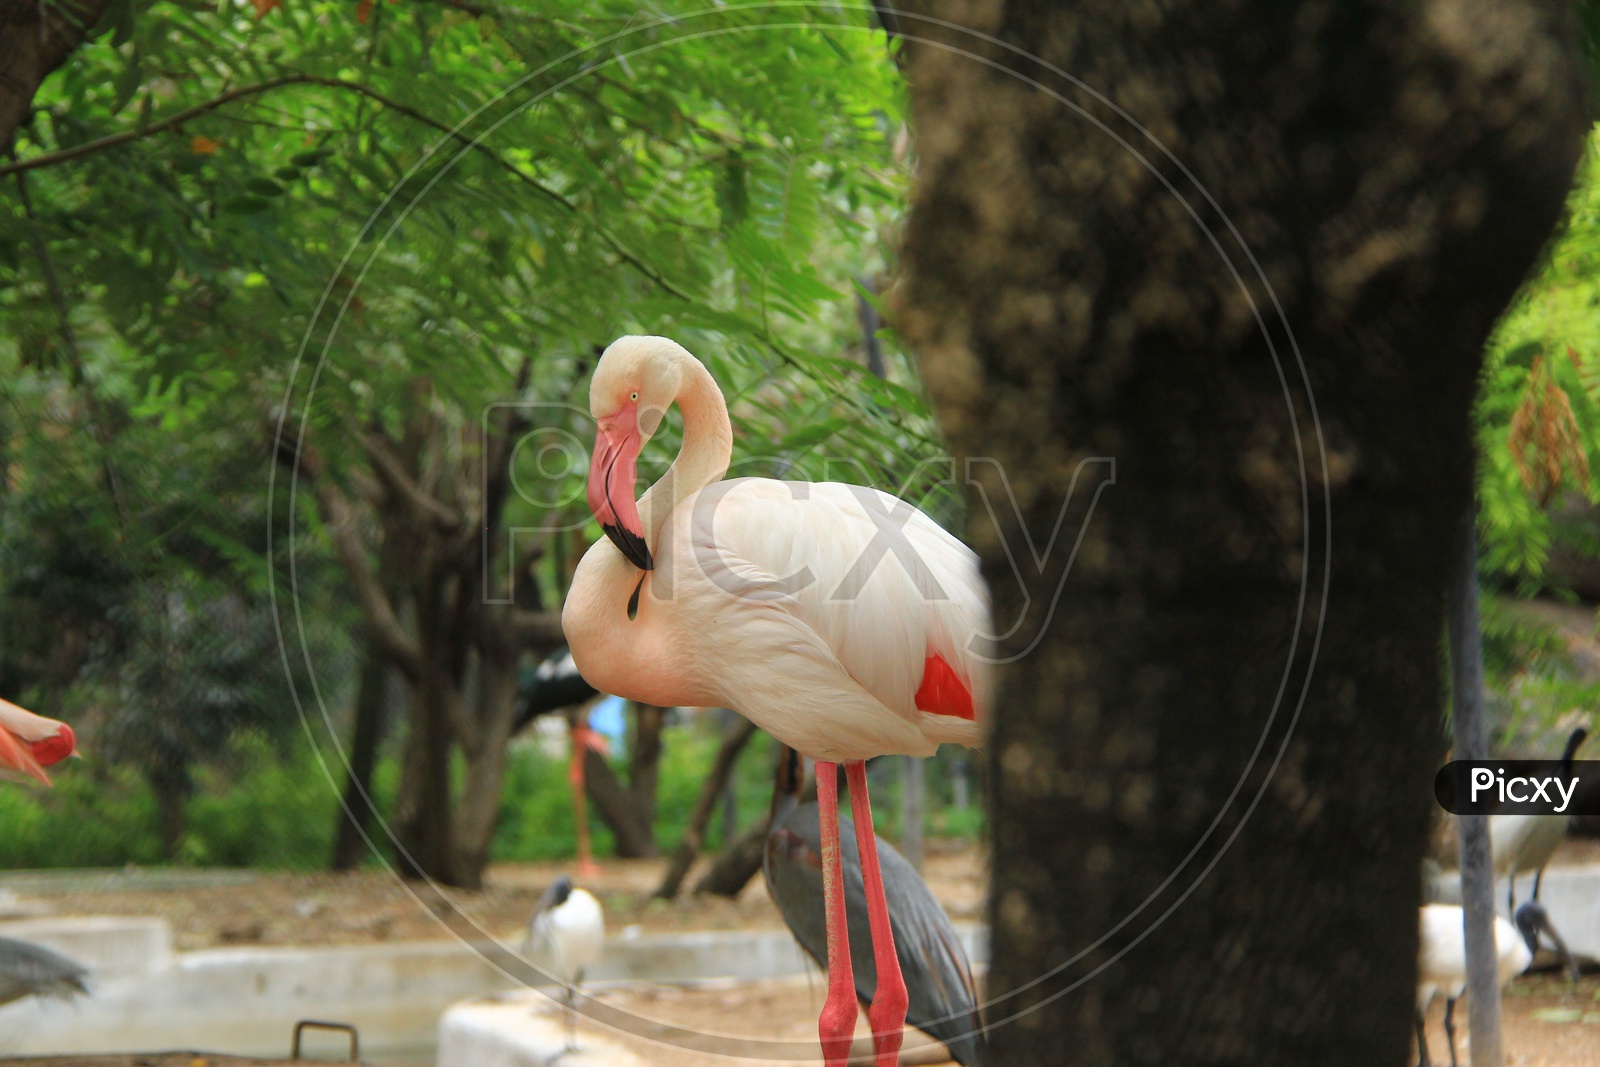 A Greater Flamingo in the zoo